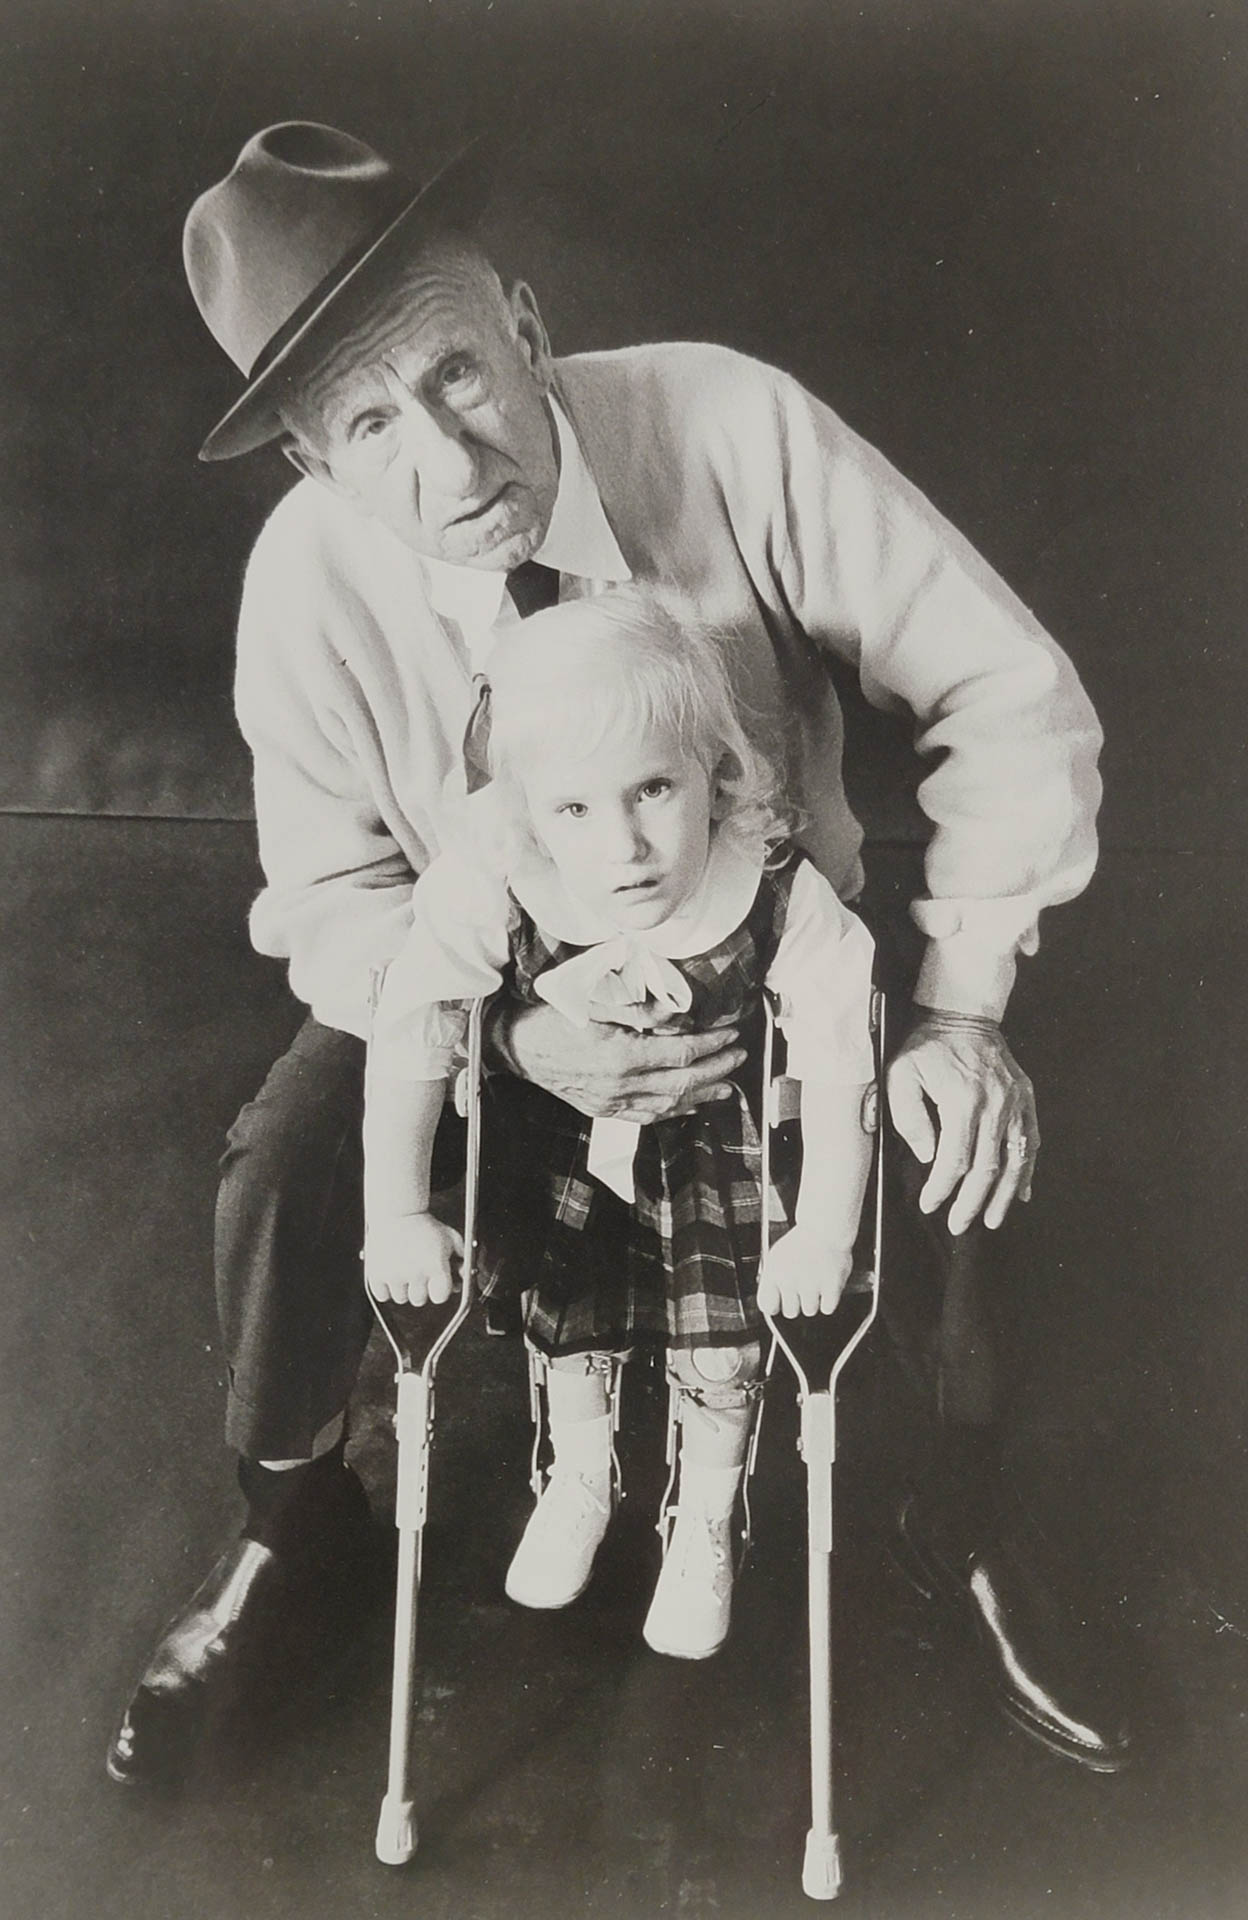 An image of an man and a child.